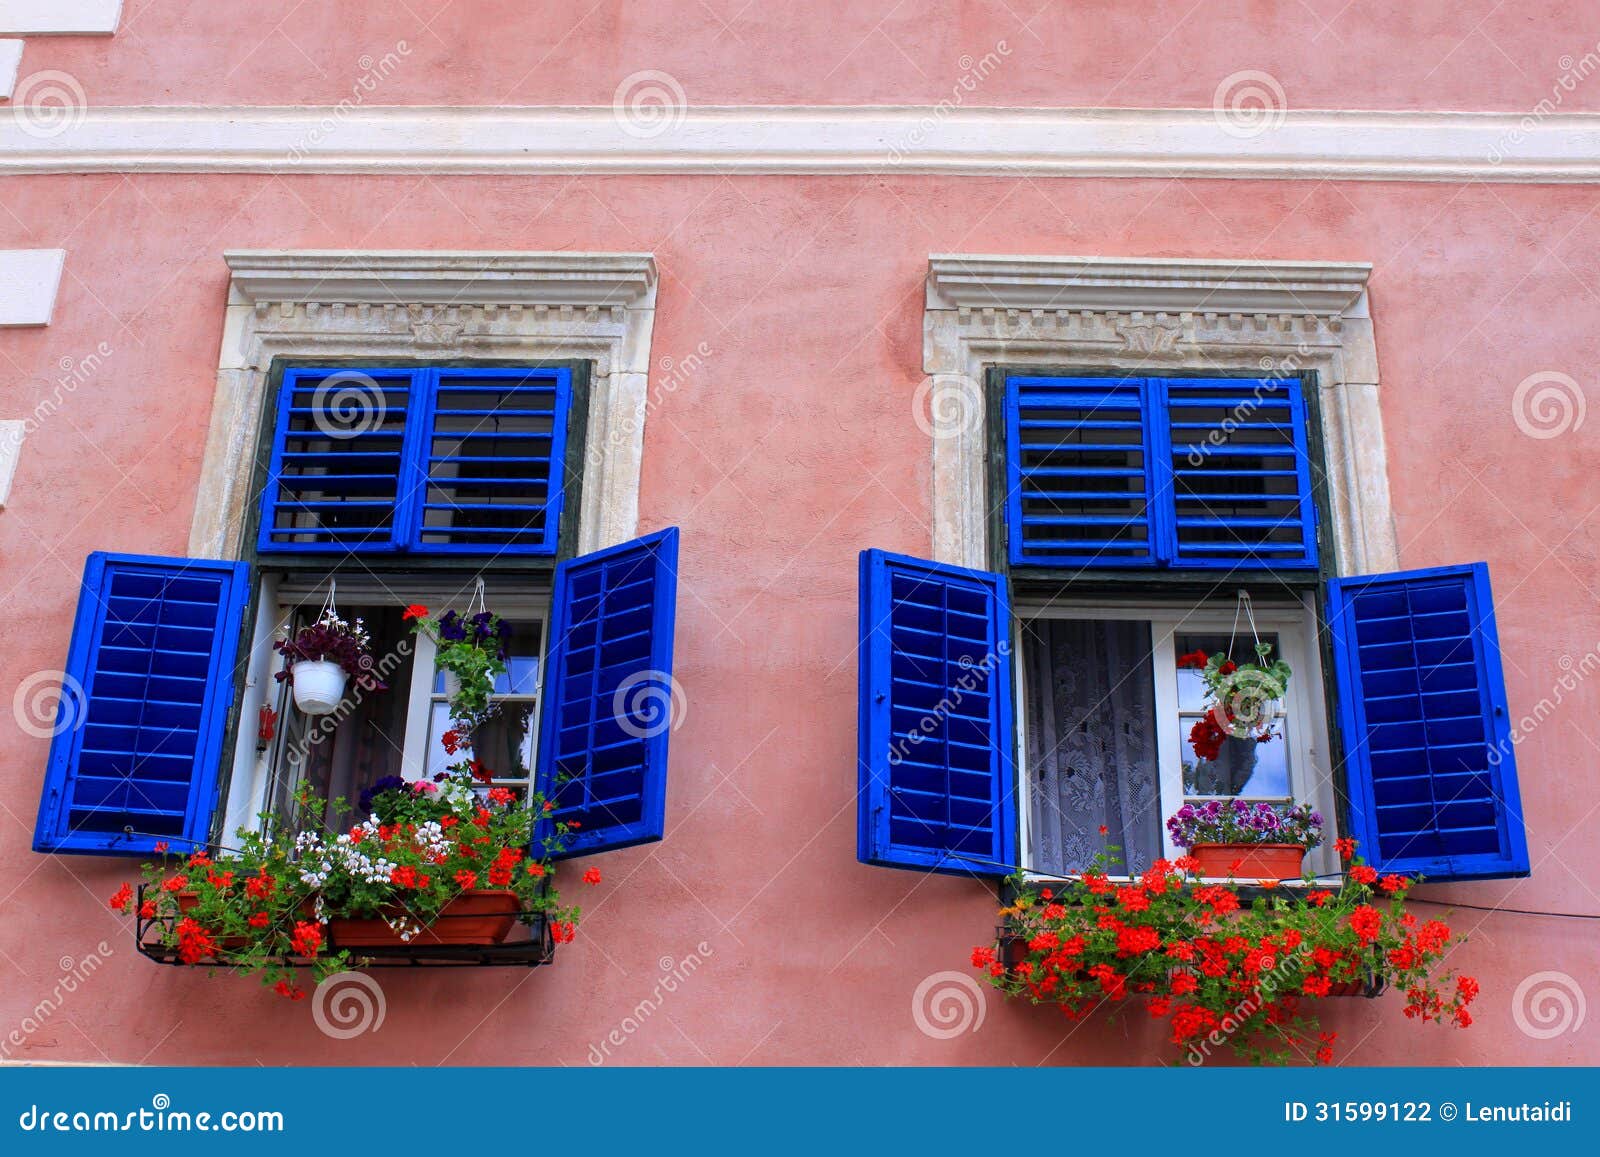 Blue Windows With Geraniums Stock Photography  Image: 31599122